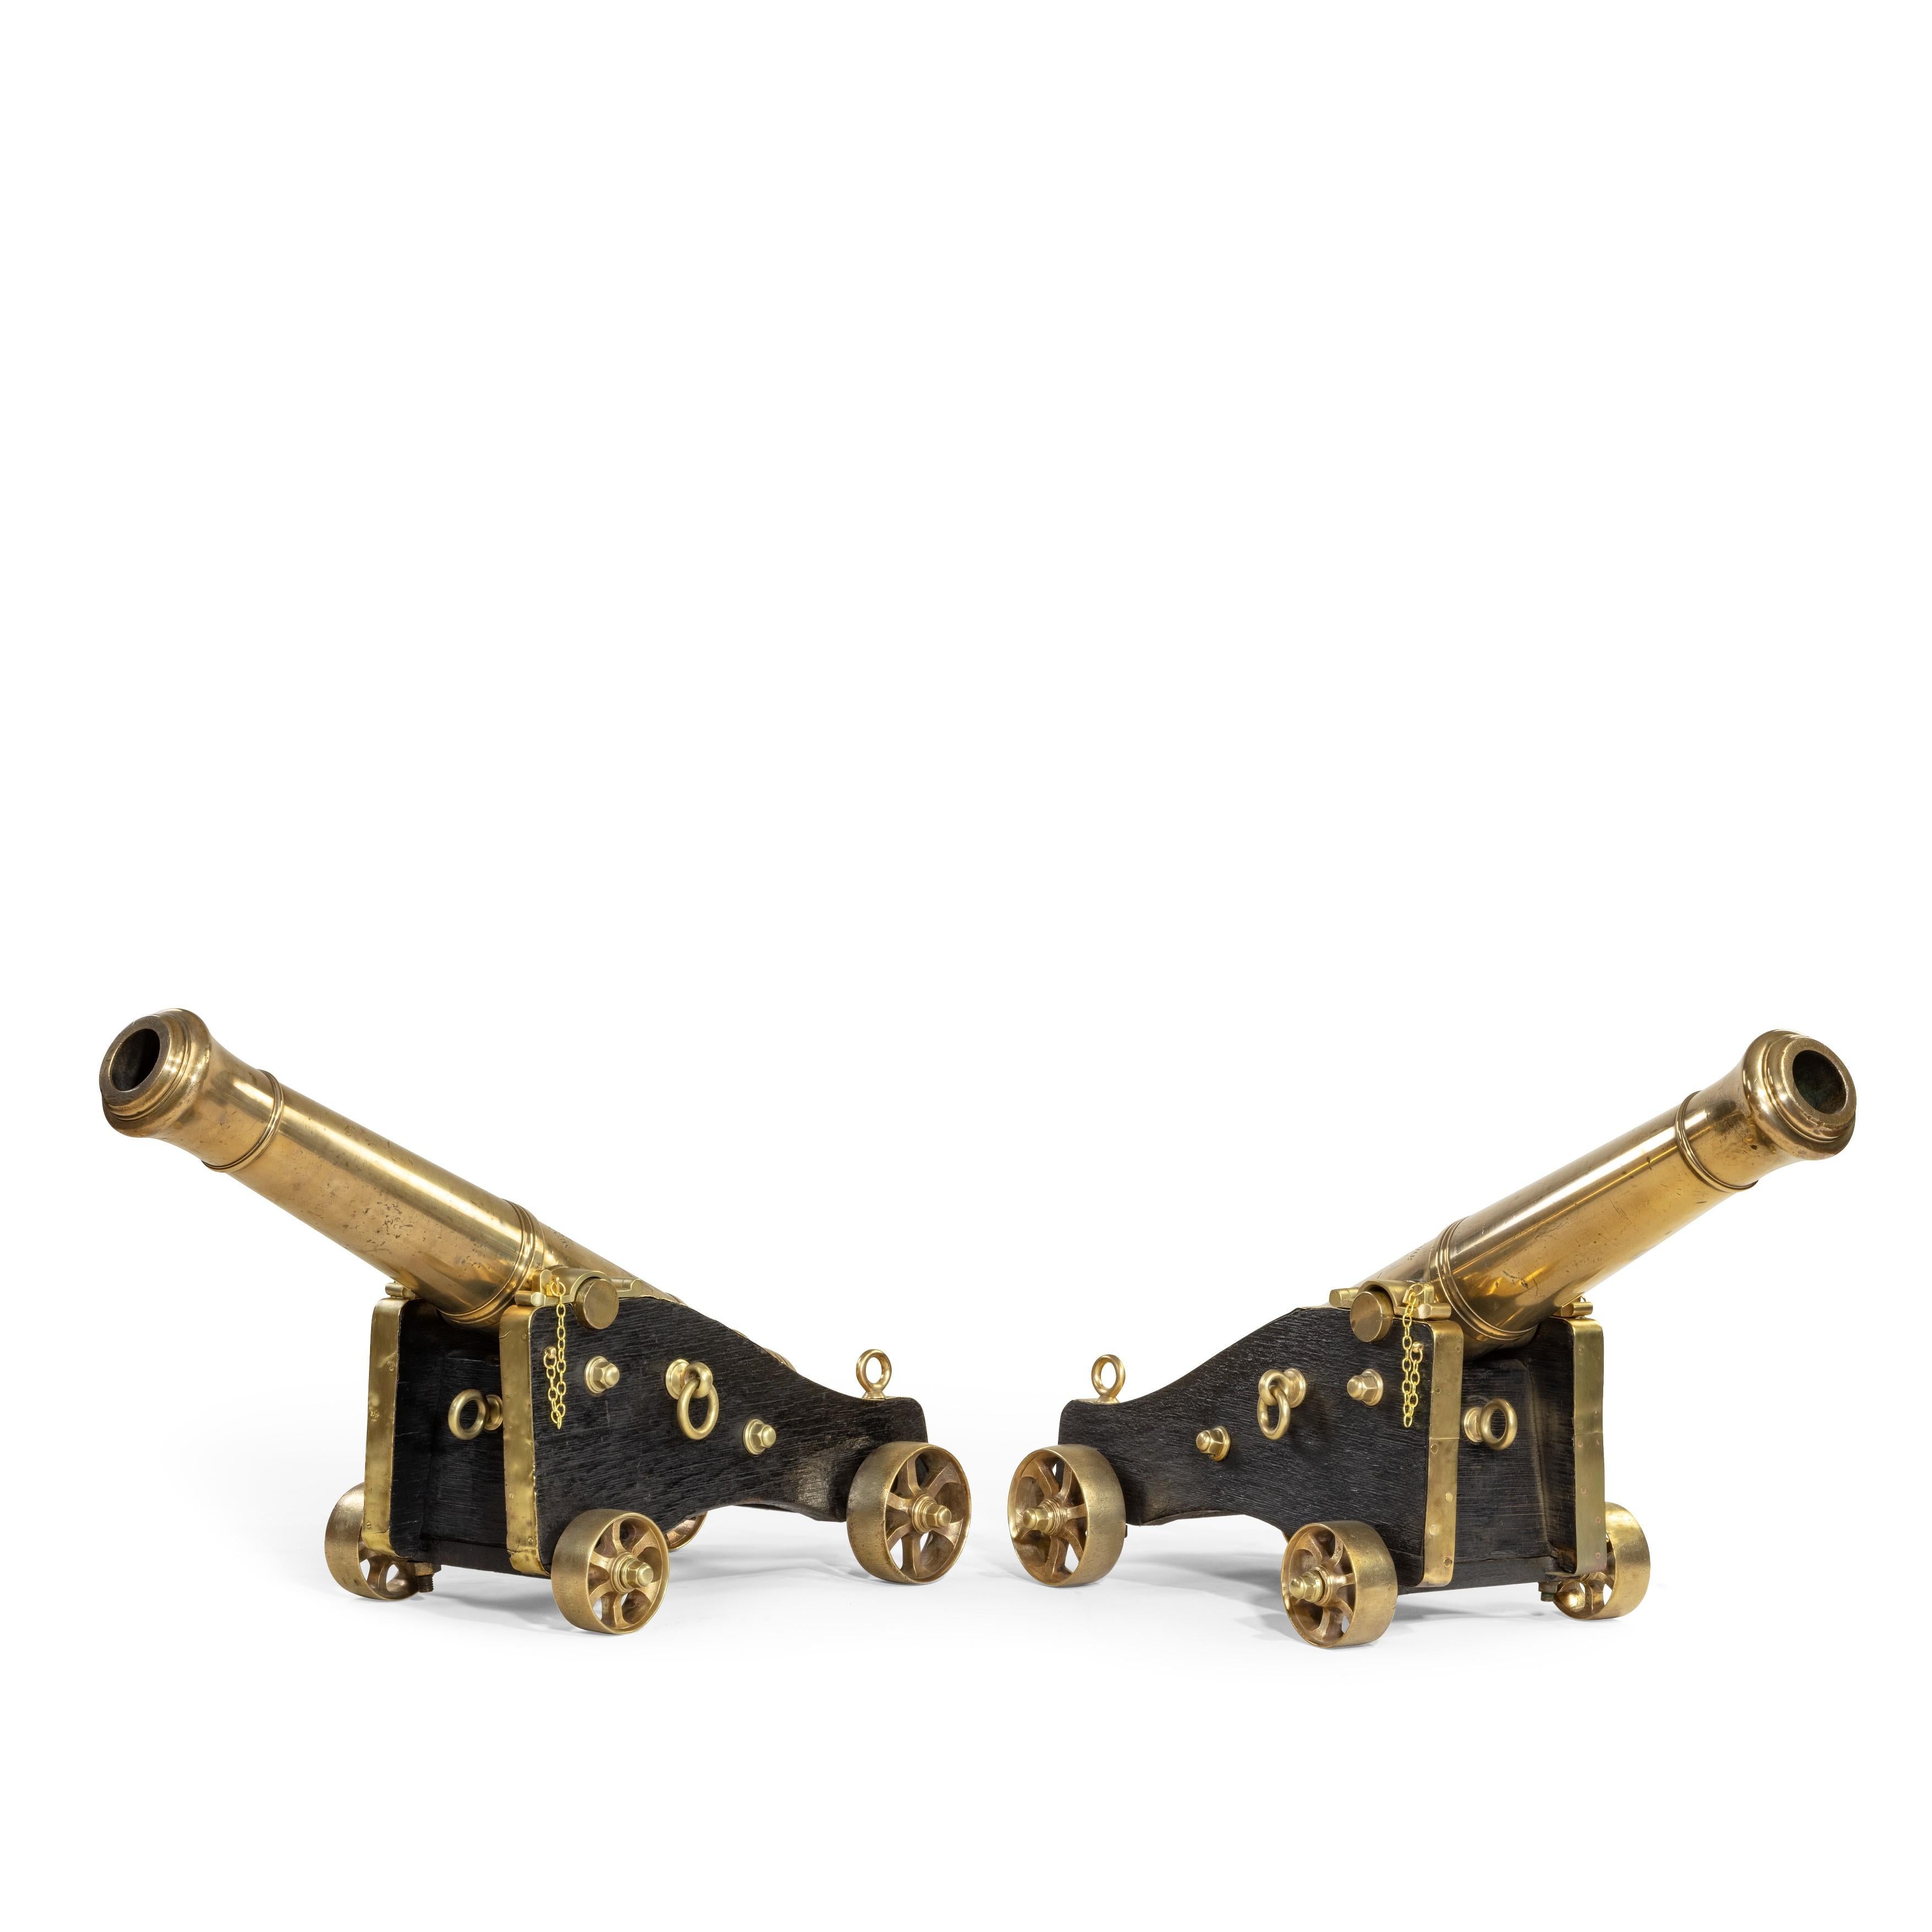 A fine pair of bronze cannon by McAndrew and Woore, set on their original brass bound black painted oak carriages with brass spider wheels, also with a powder measurer and swab. English, circa 1850.

Recorded as working from 1827-1855

Measures: